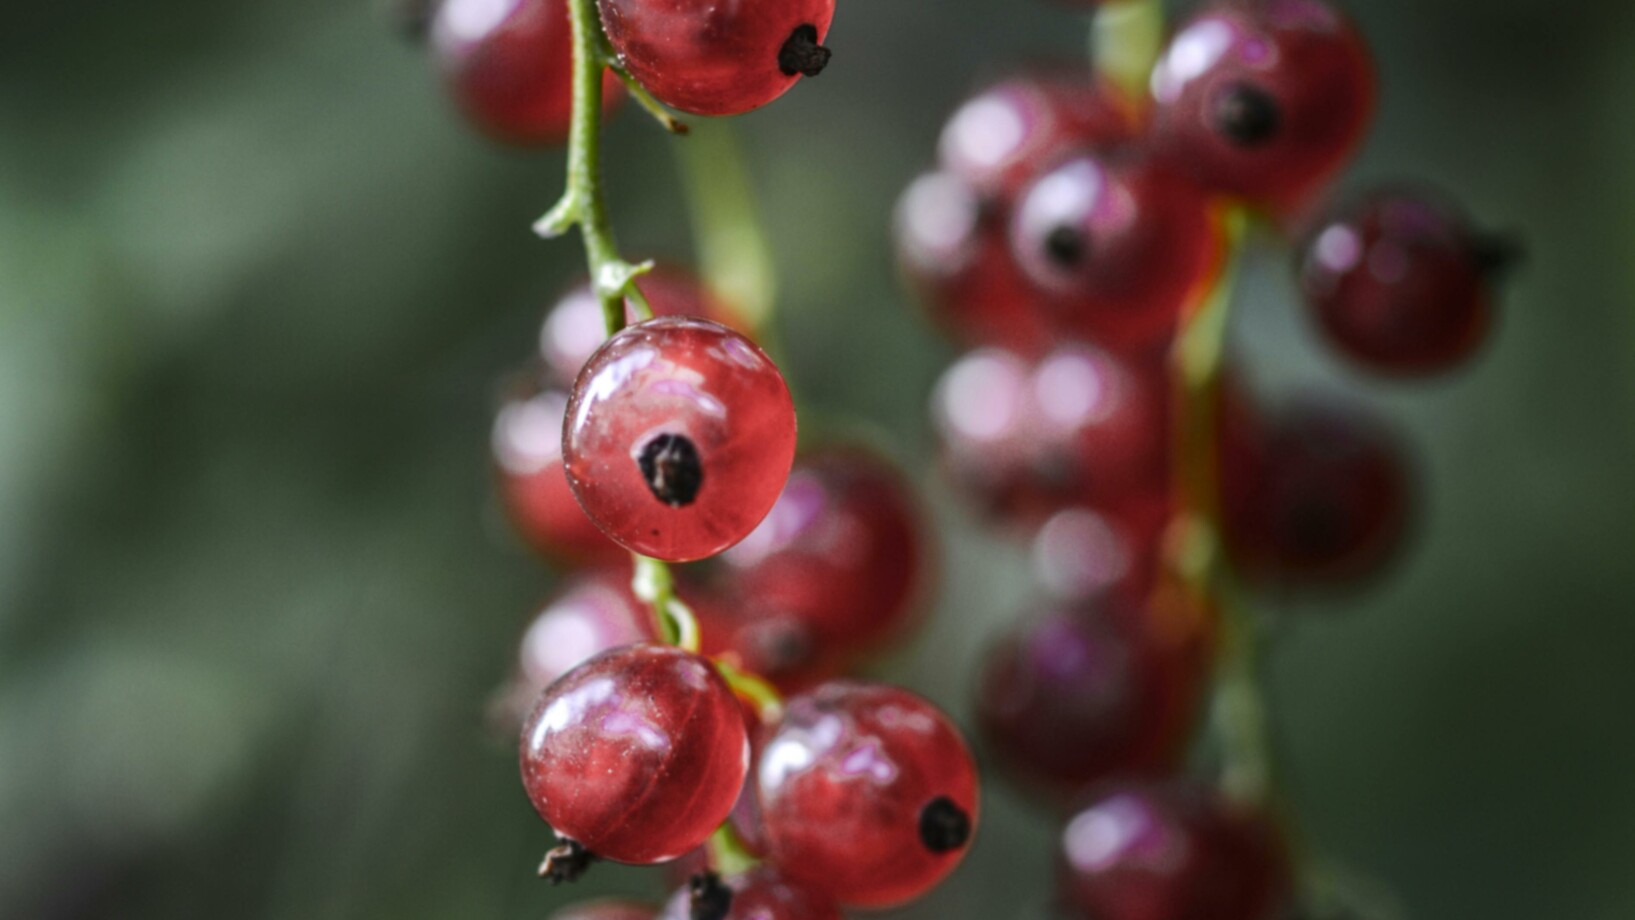 Focus photography of red round fruit